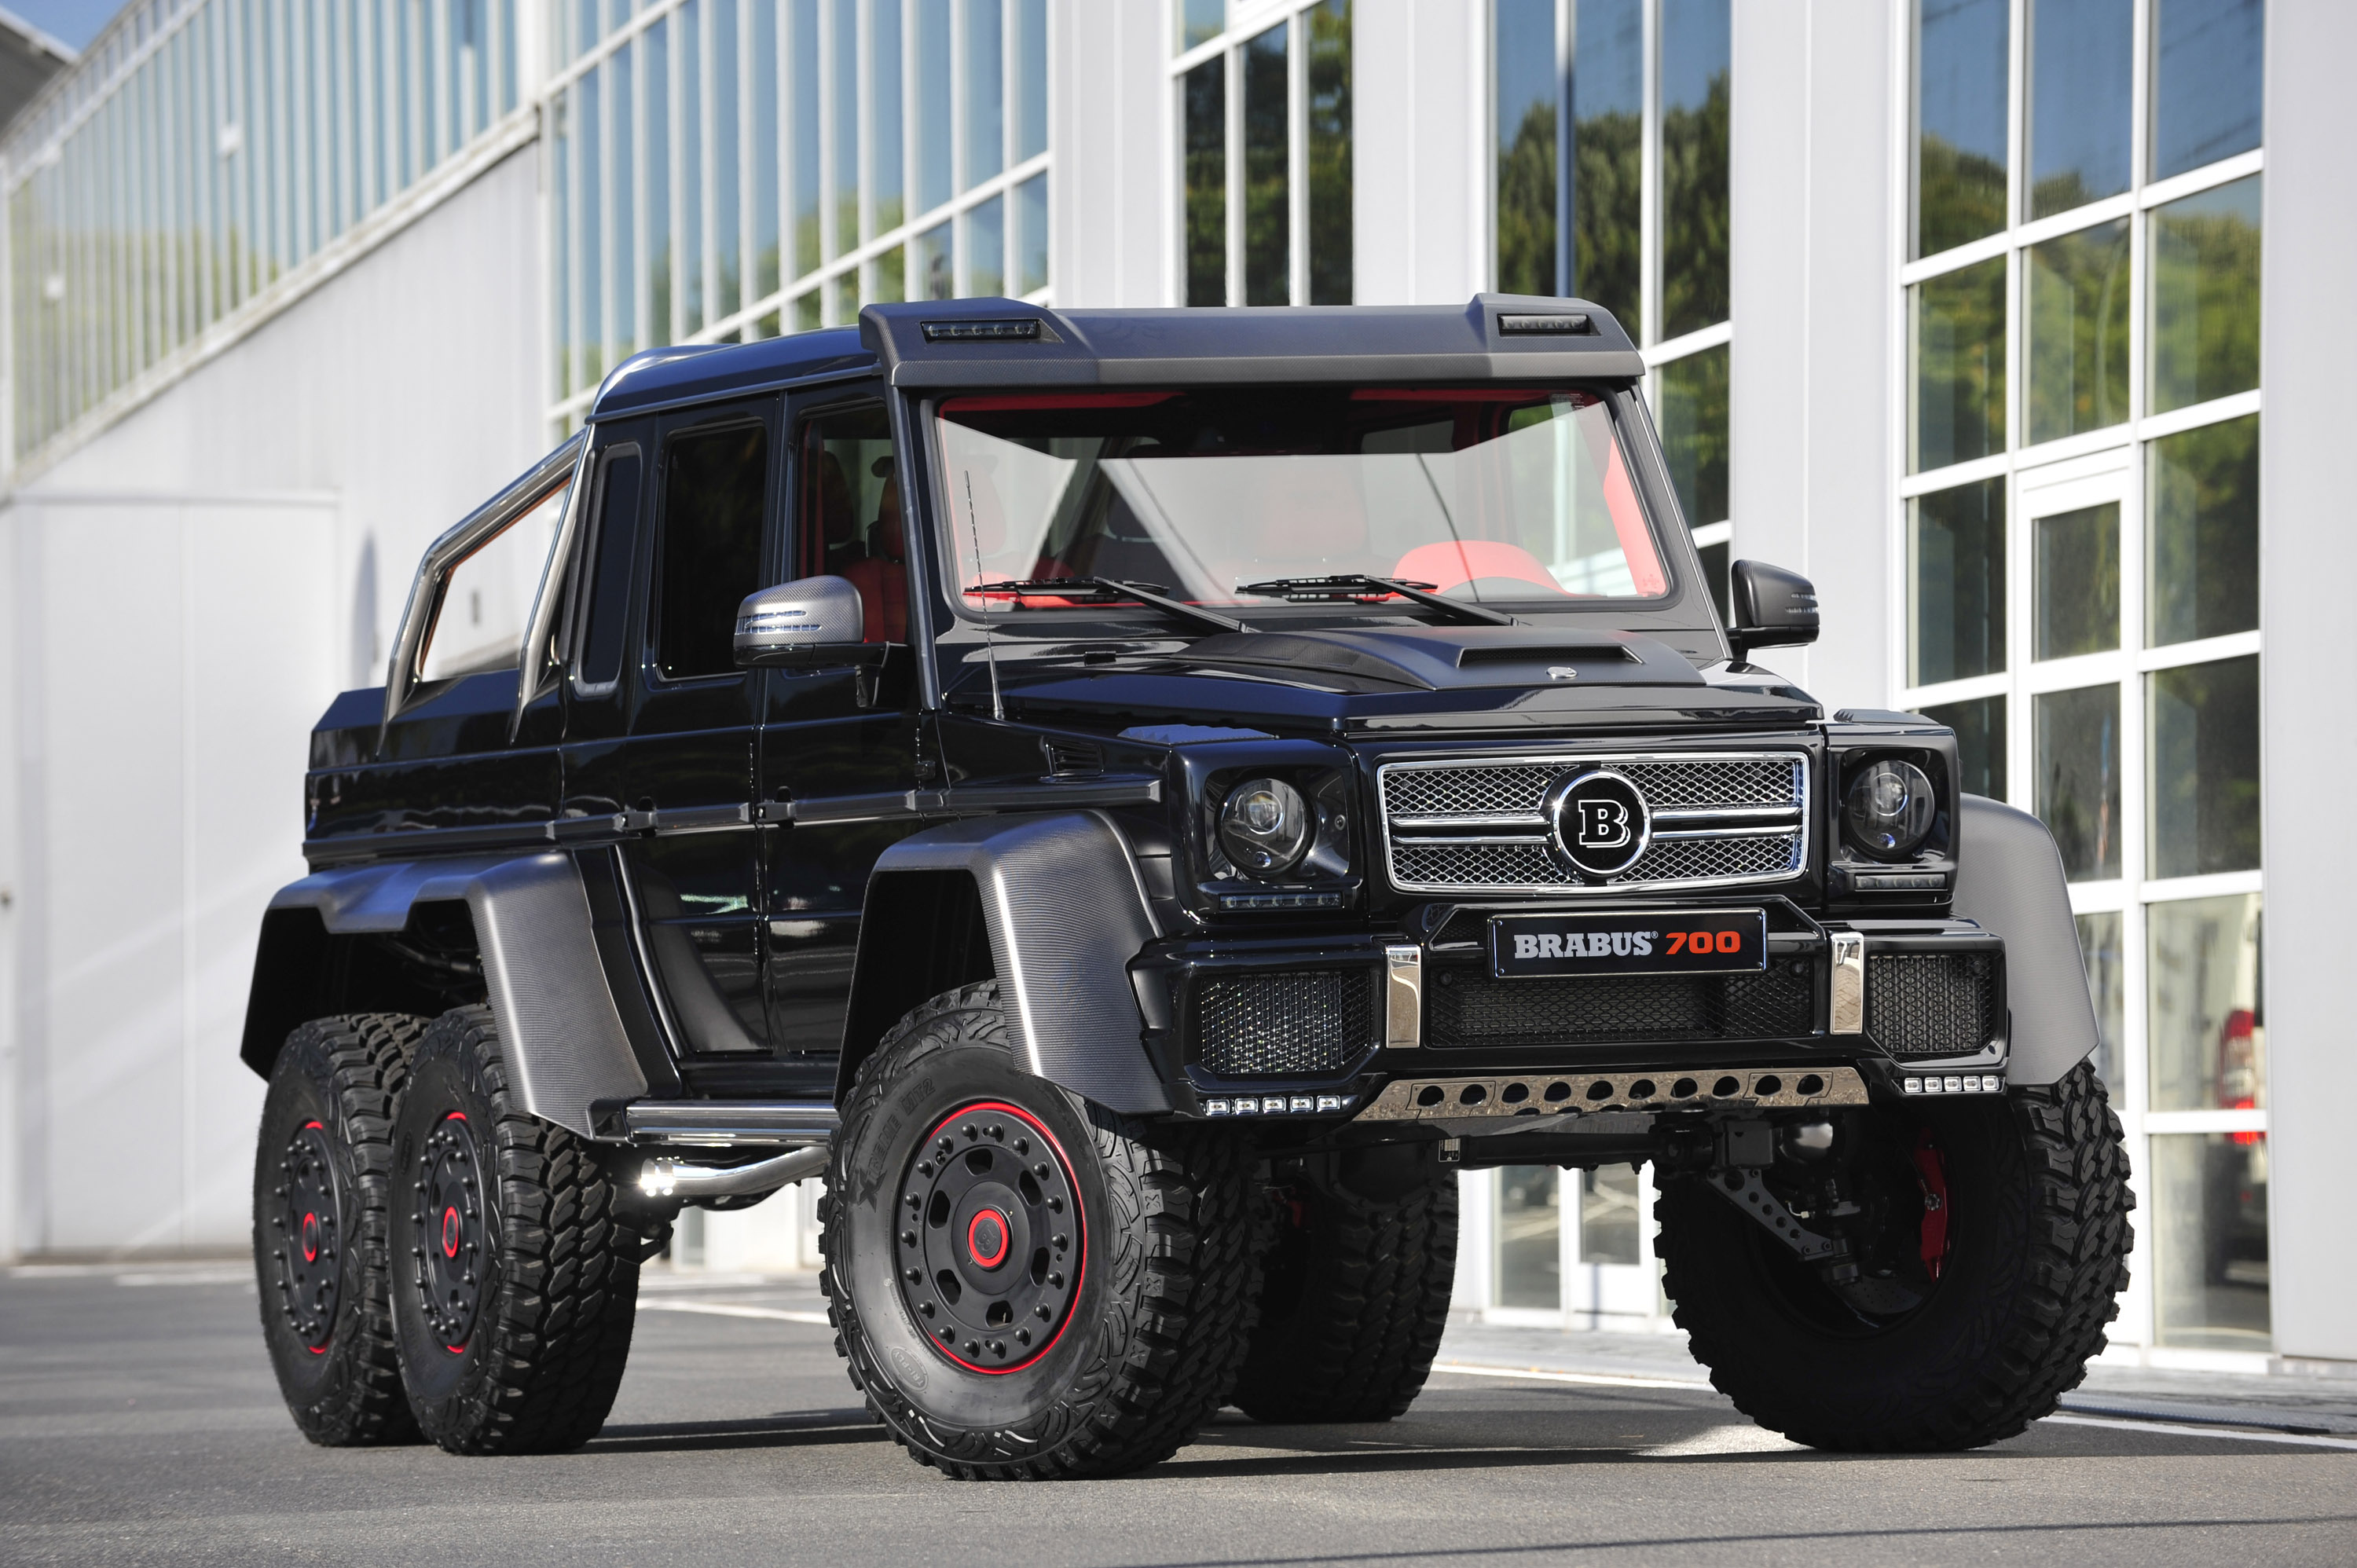 Download free Brabus HD pictures